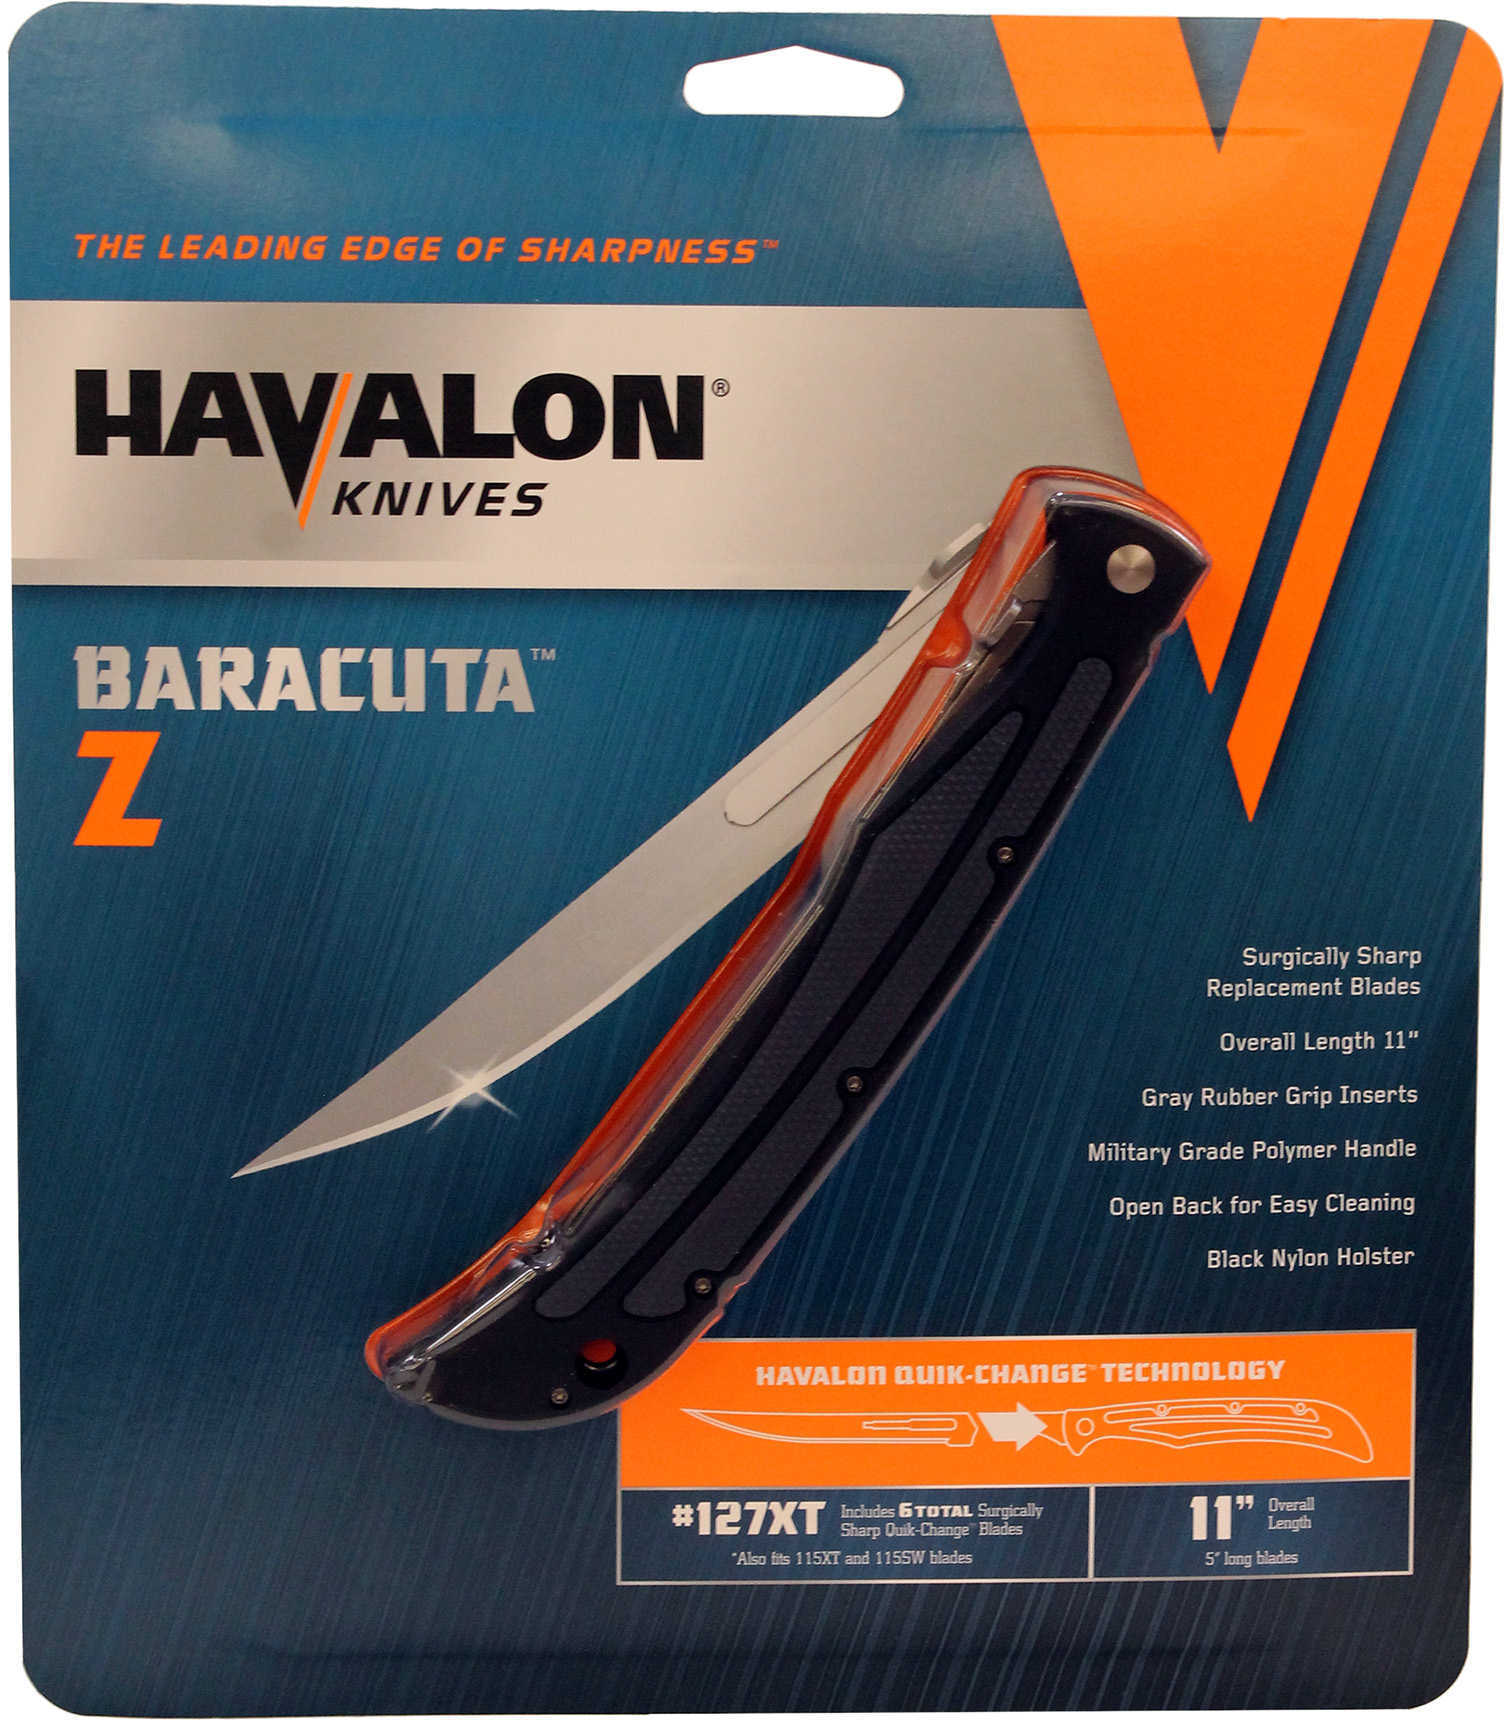 Havalon Baracuta Z Folding Knife Liner Lock 5" Stainless Steel Blade Black Polymer Handle with Gray Rubber Grip Inserts